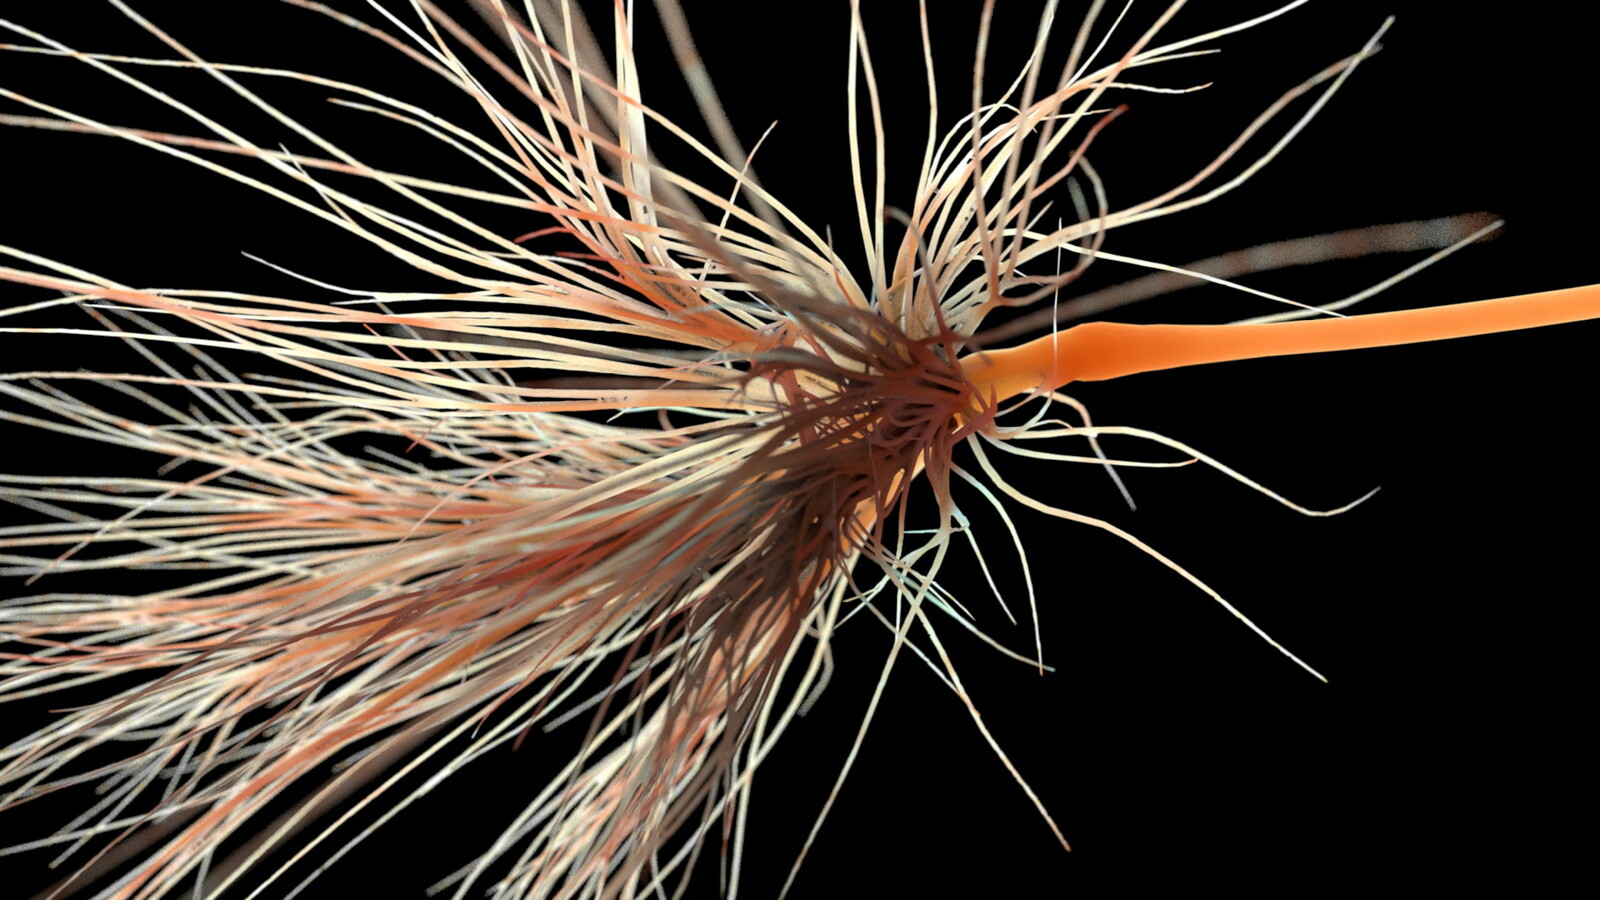 Detailed Model of a Neuron